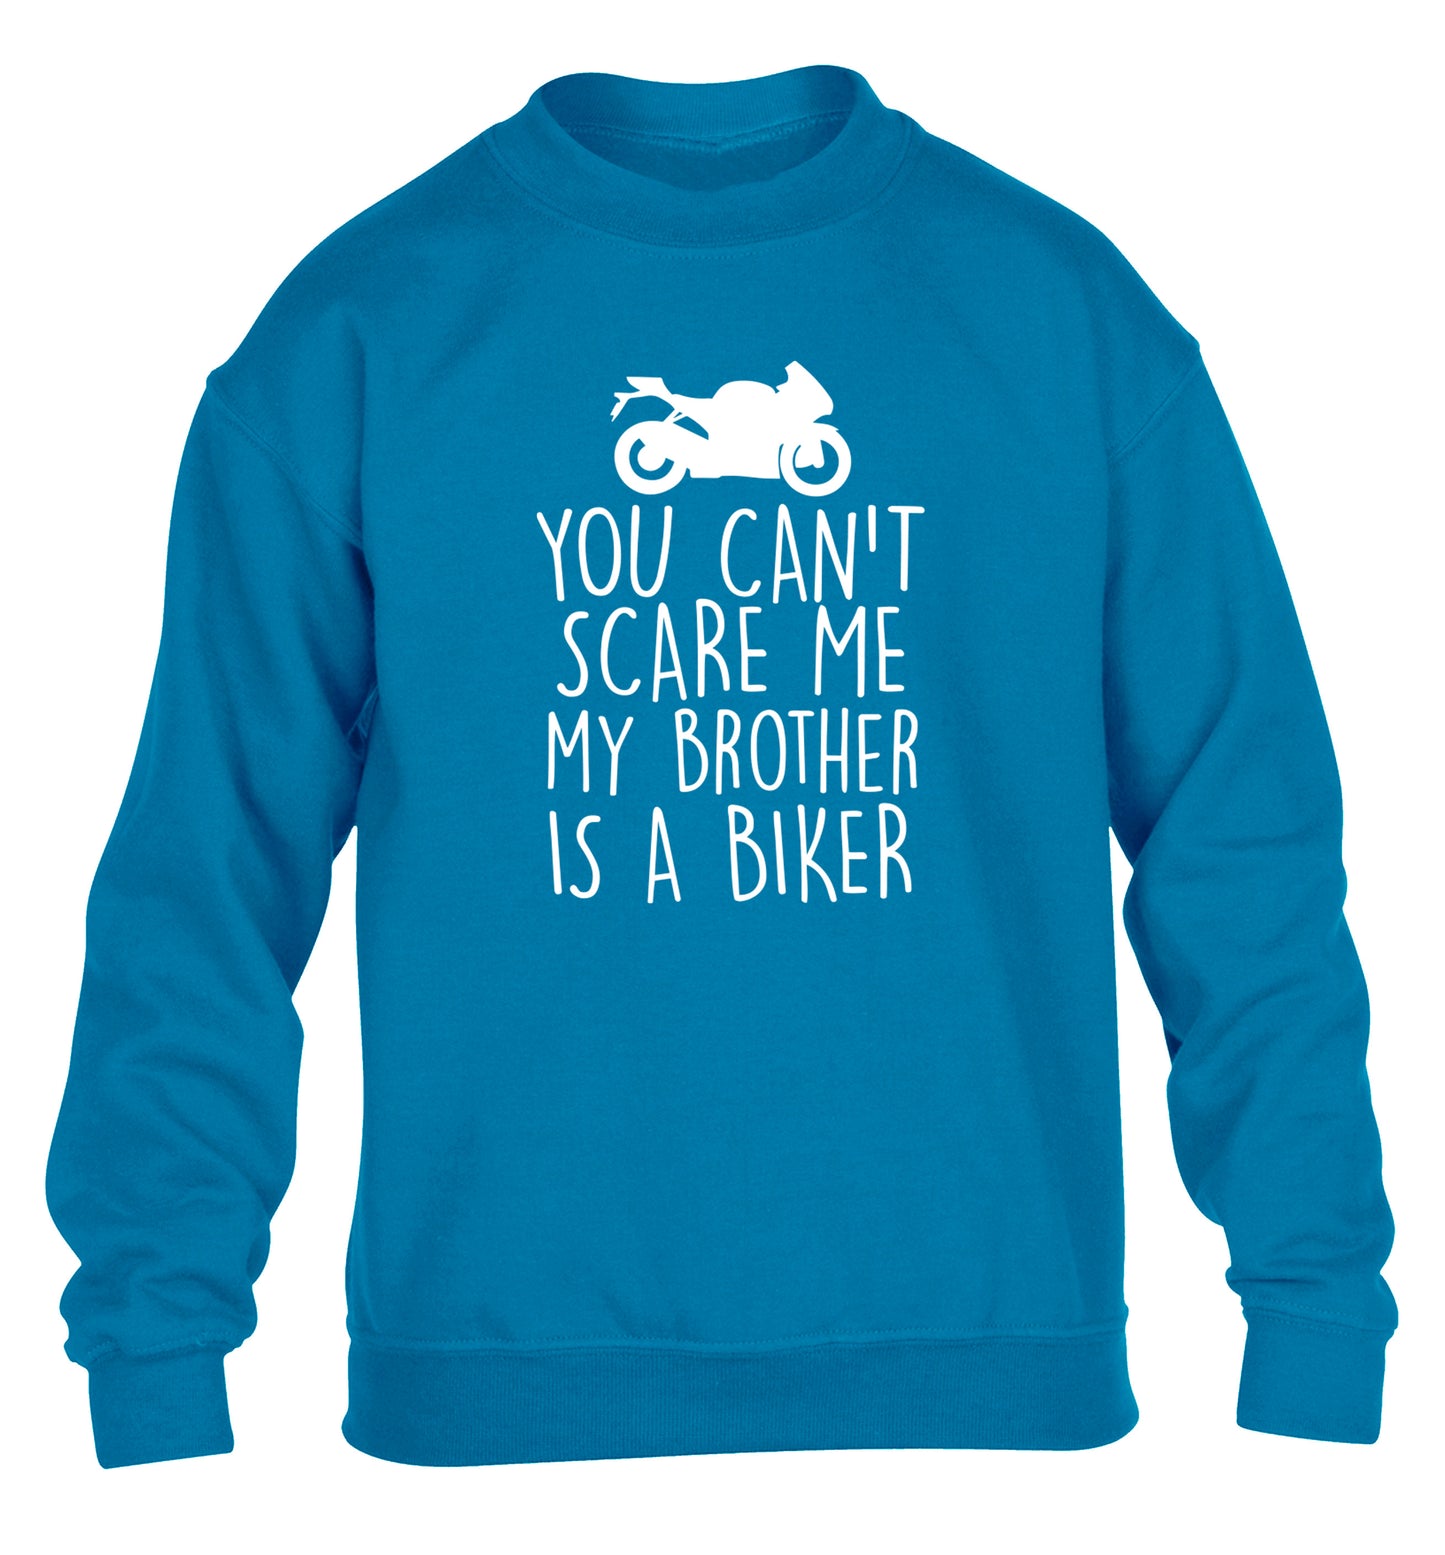 You can't scare me my brother is a biker children's blue sweater 12-13 Years